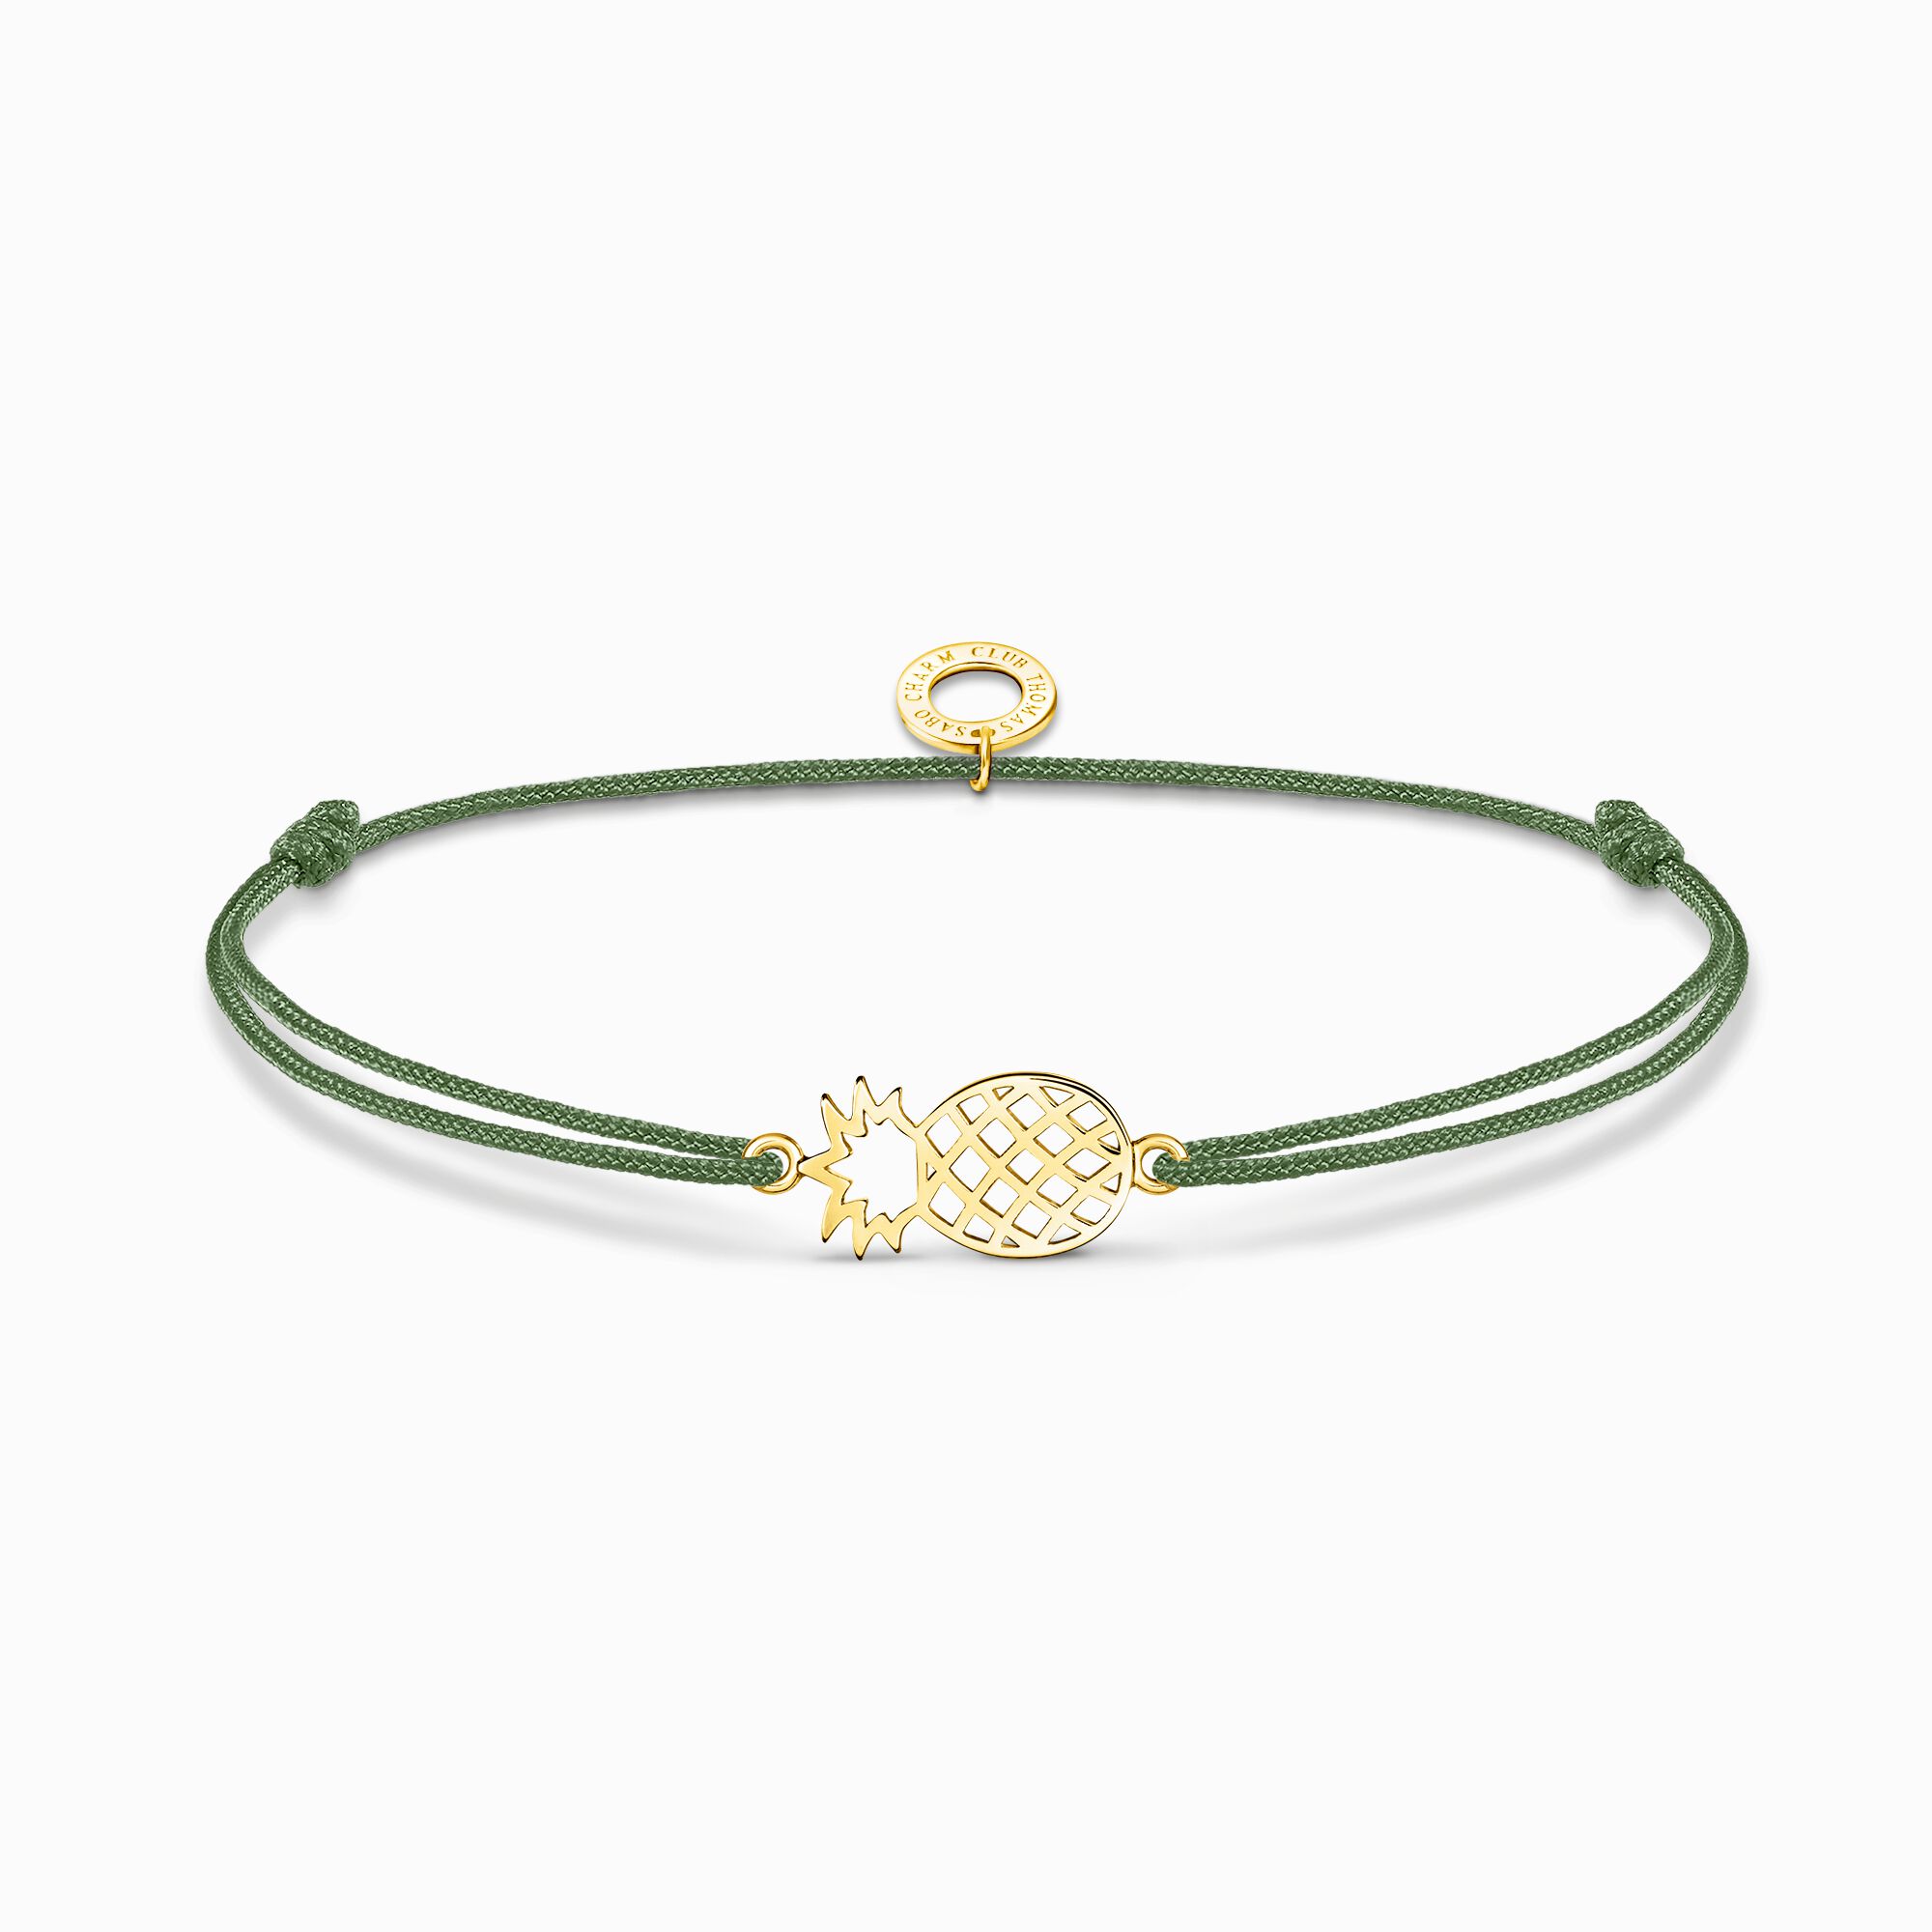 Bracelet Little Secret pineapple from the Charming Collection collection in the THOMAS SABO online store